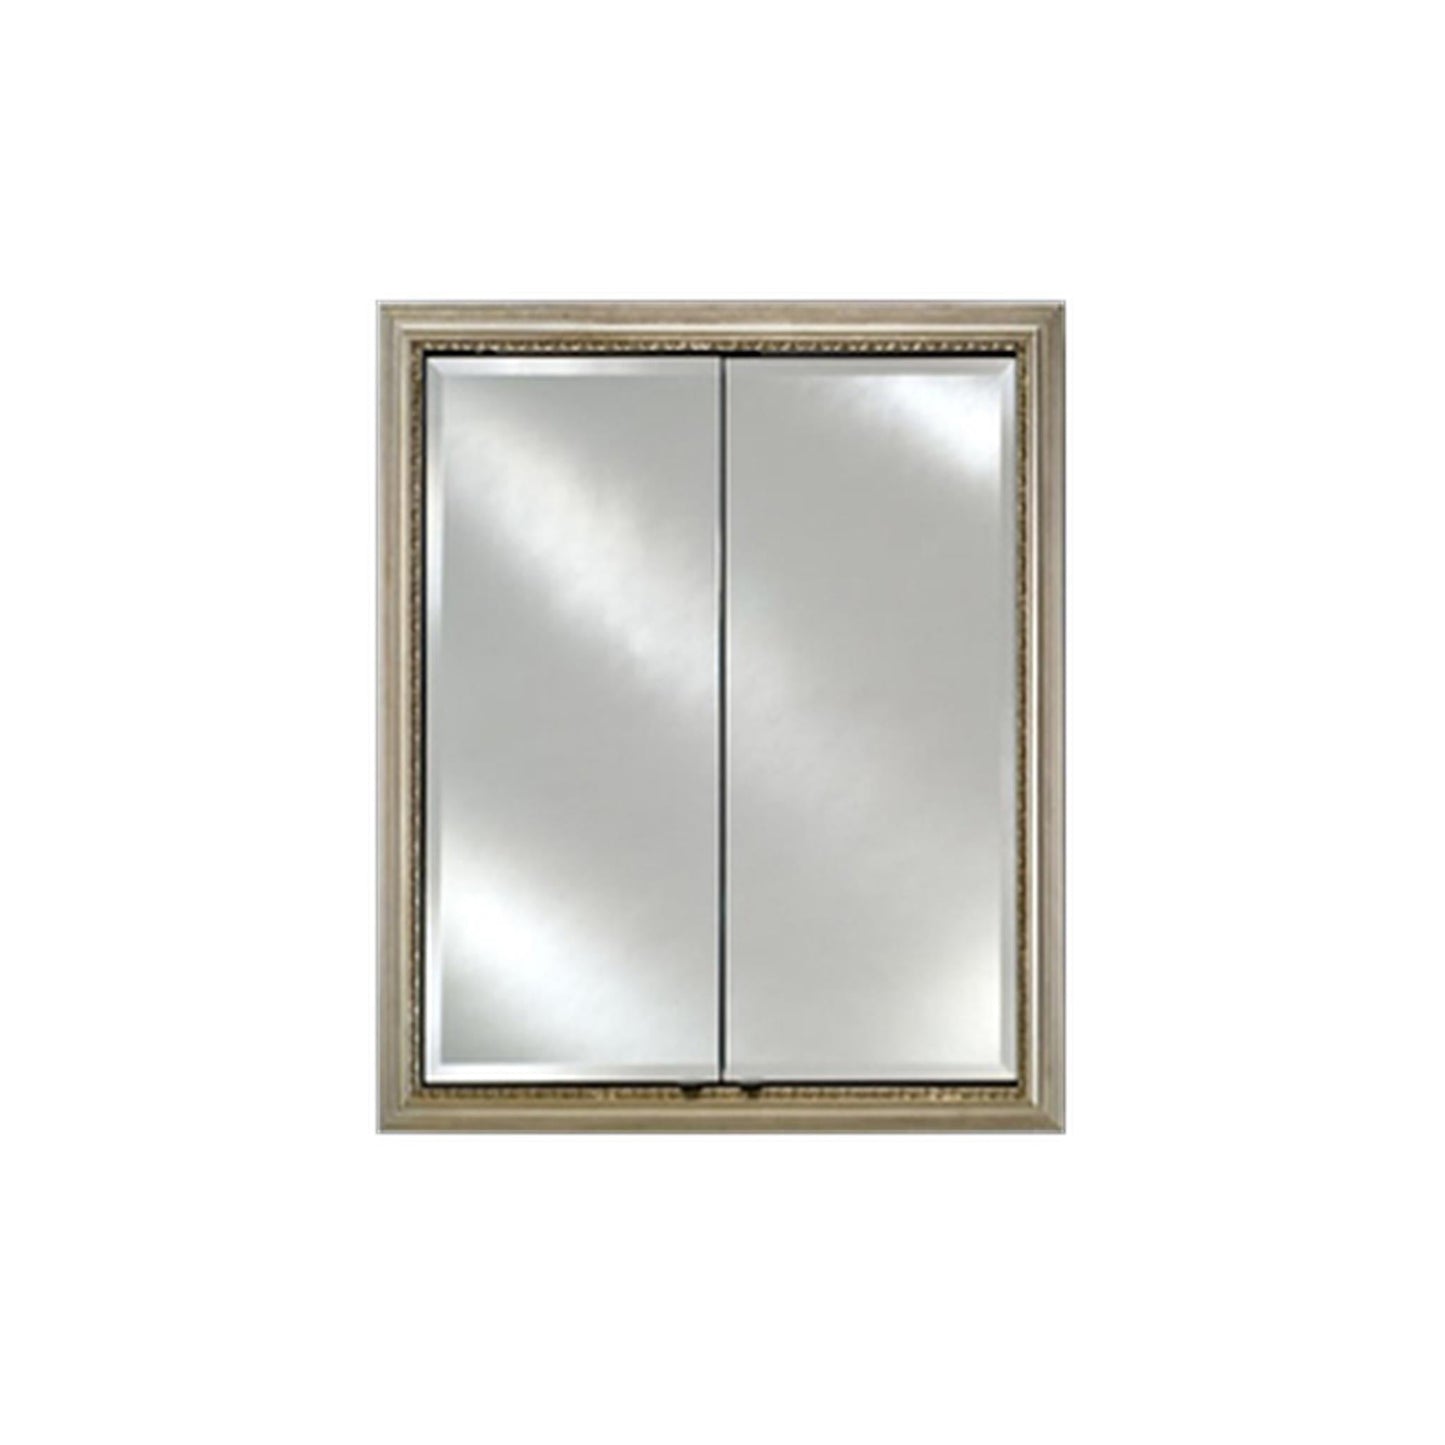 Afina Signature 24" x 30" Polished Glimmer-Scallop Recessed Double Door Medicine Cabinet With Beveled Edge Mirror